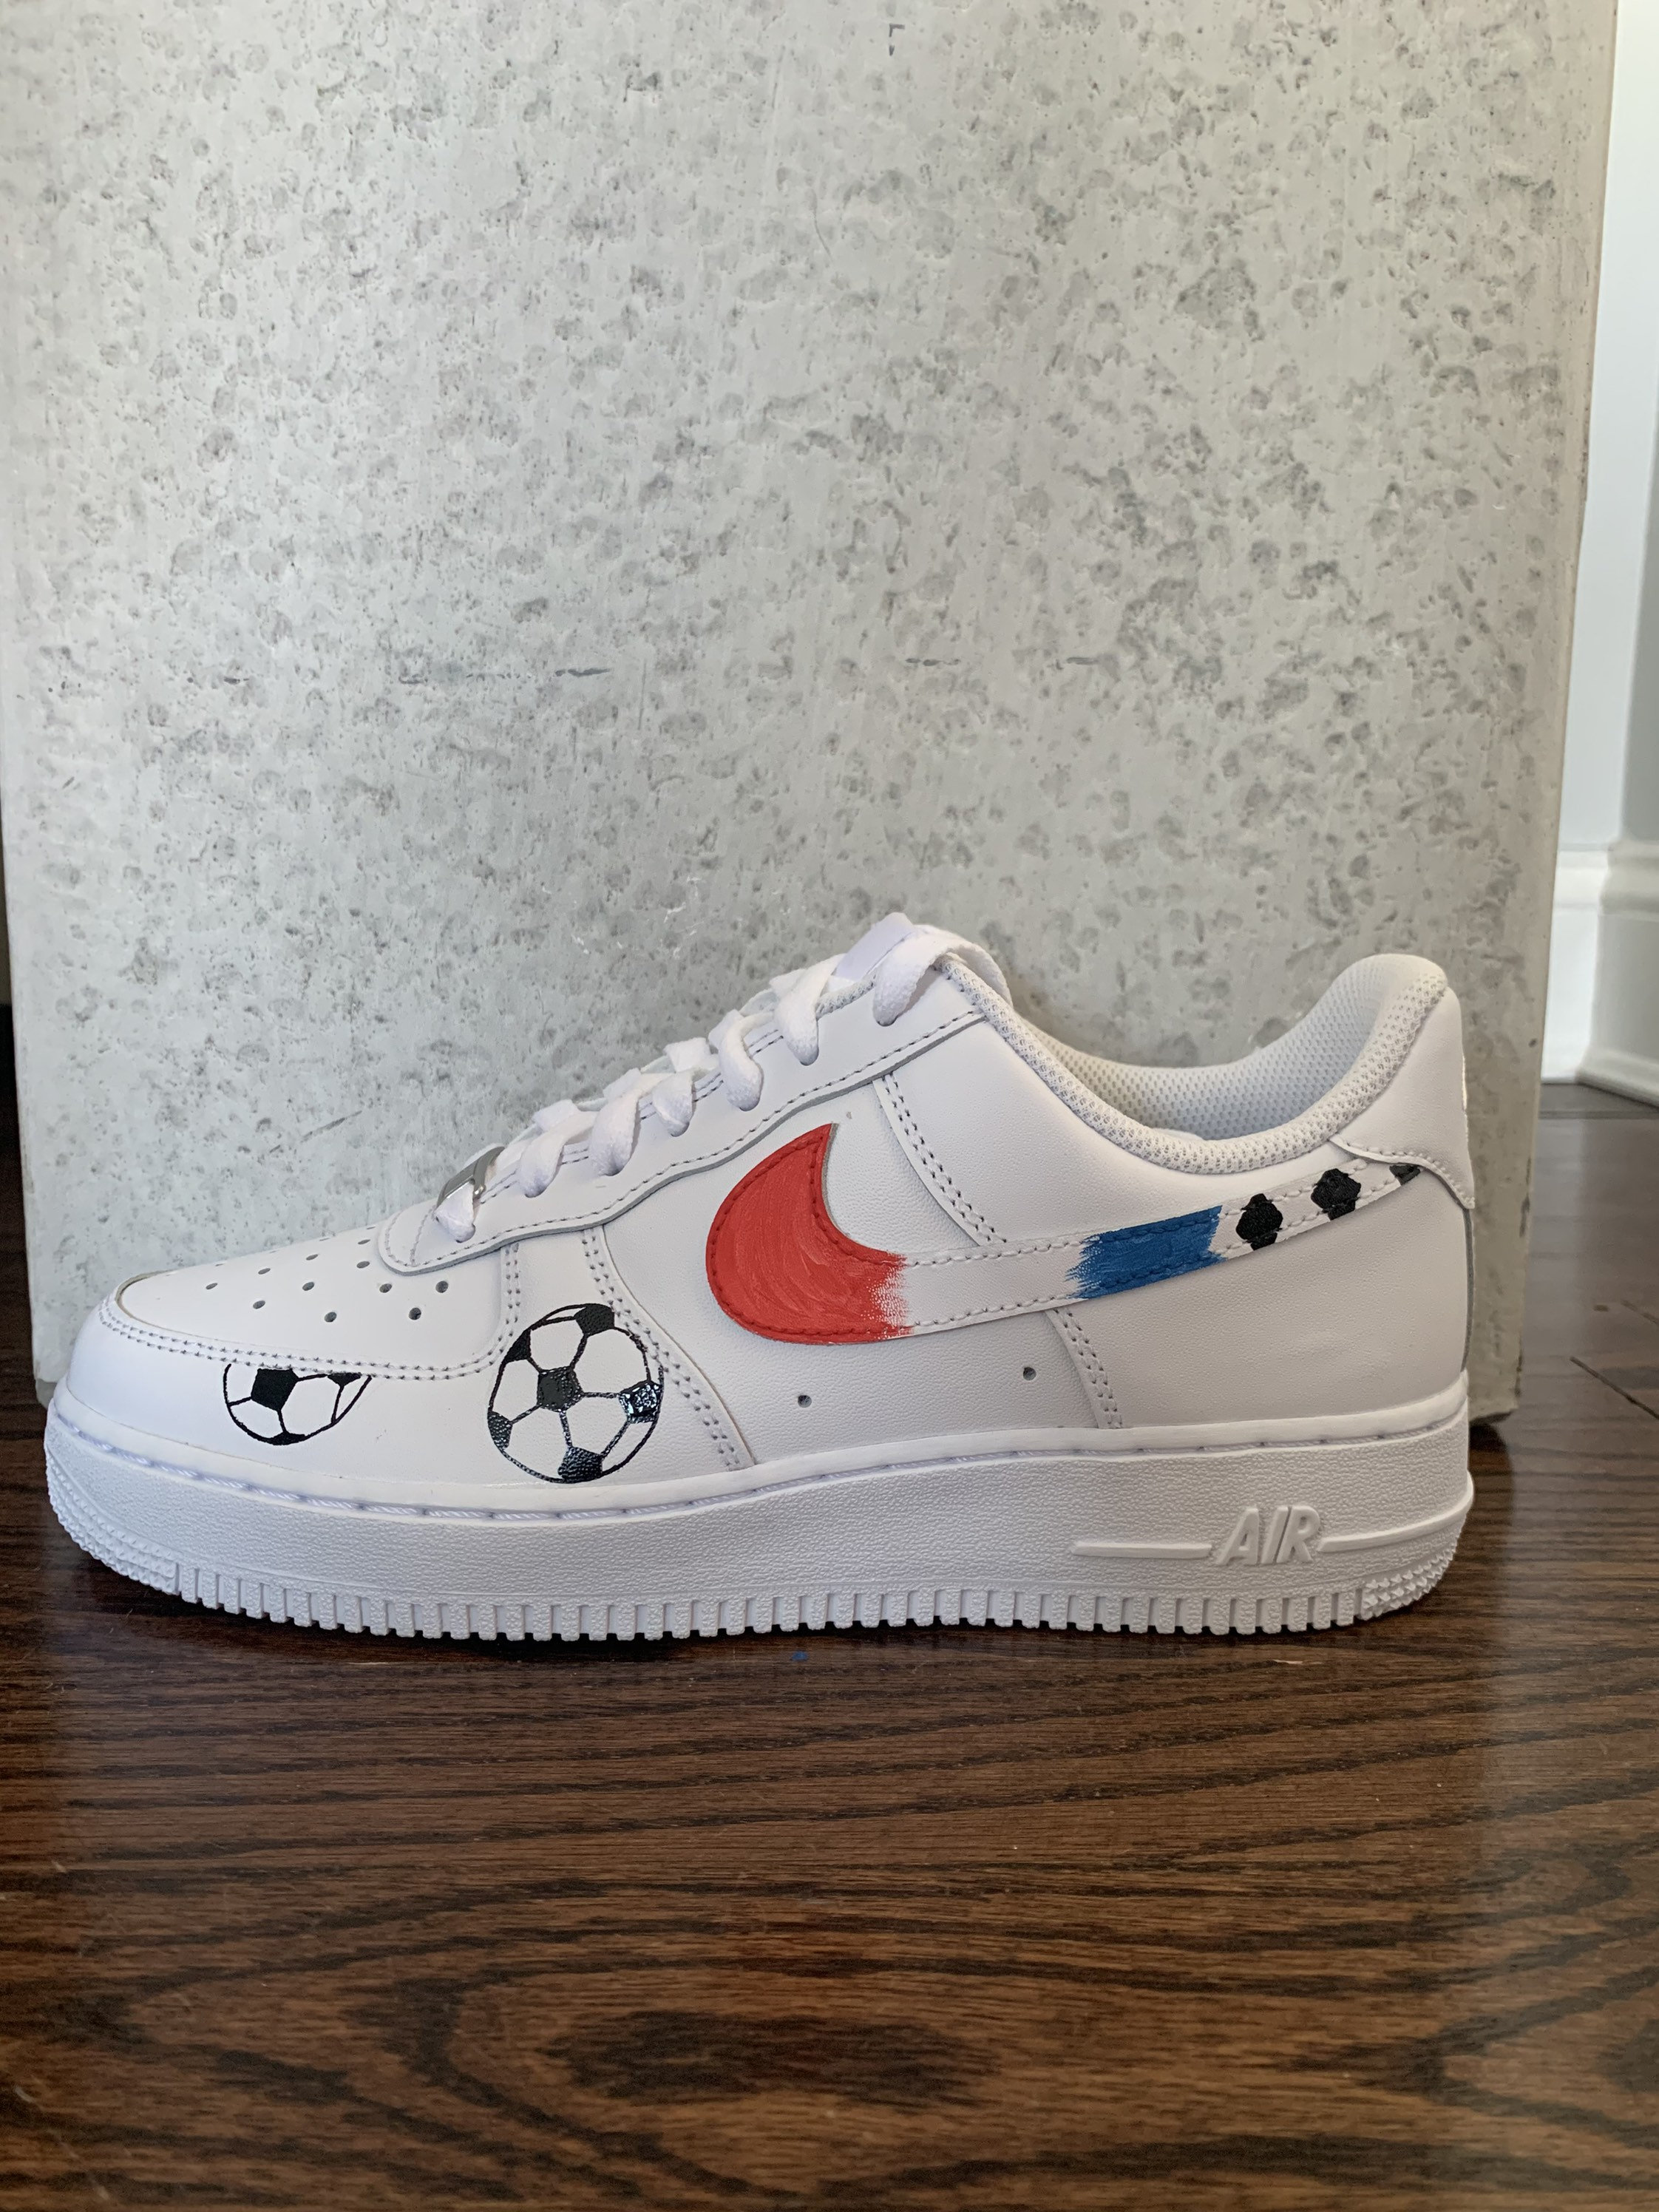 A friend asked me to make custom sneakers for the son of their